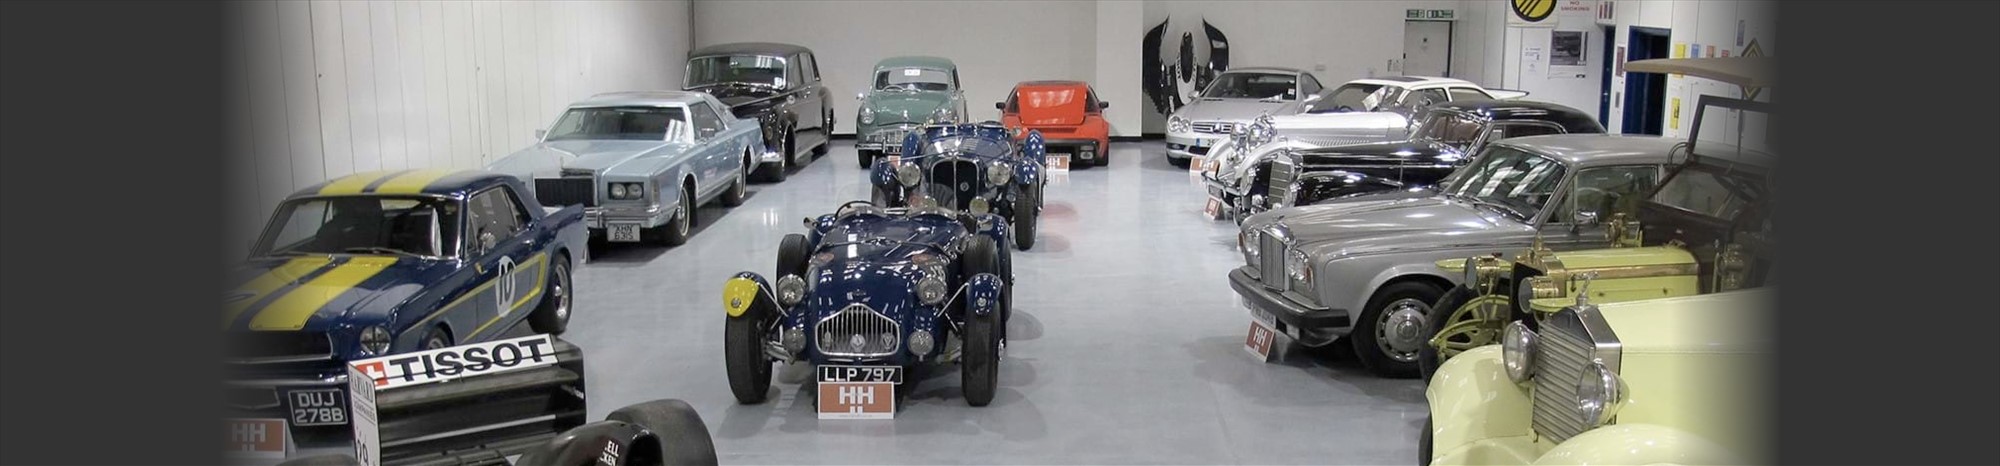 H&H Classic Car Auction showroom featuring Rolls Royce and Mercedes